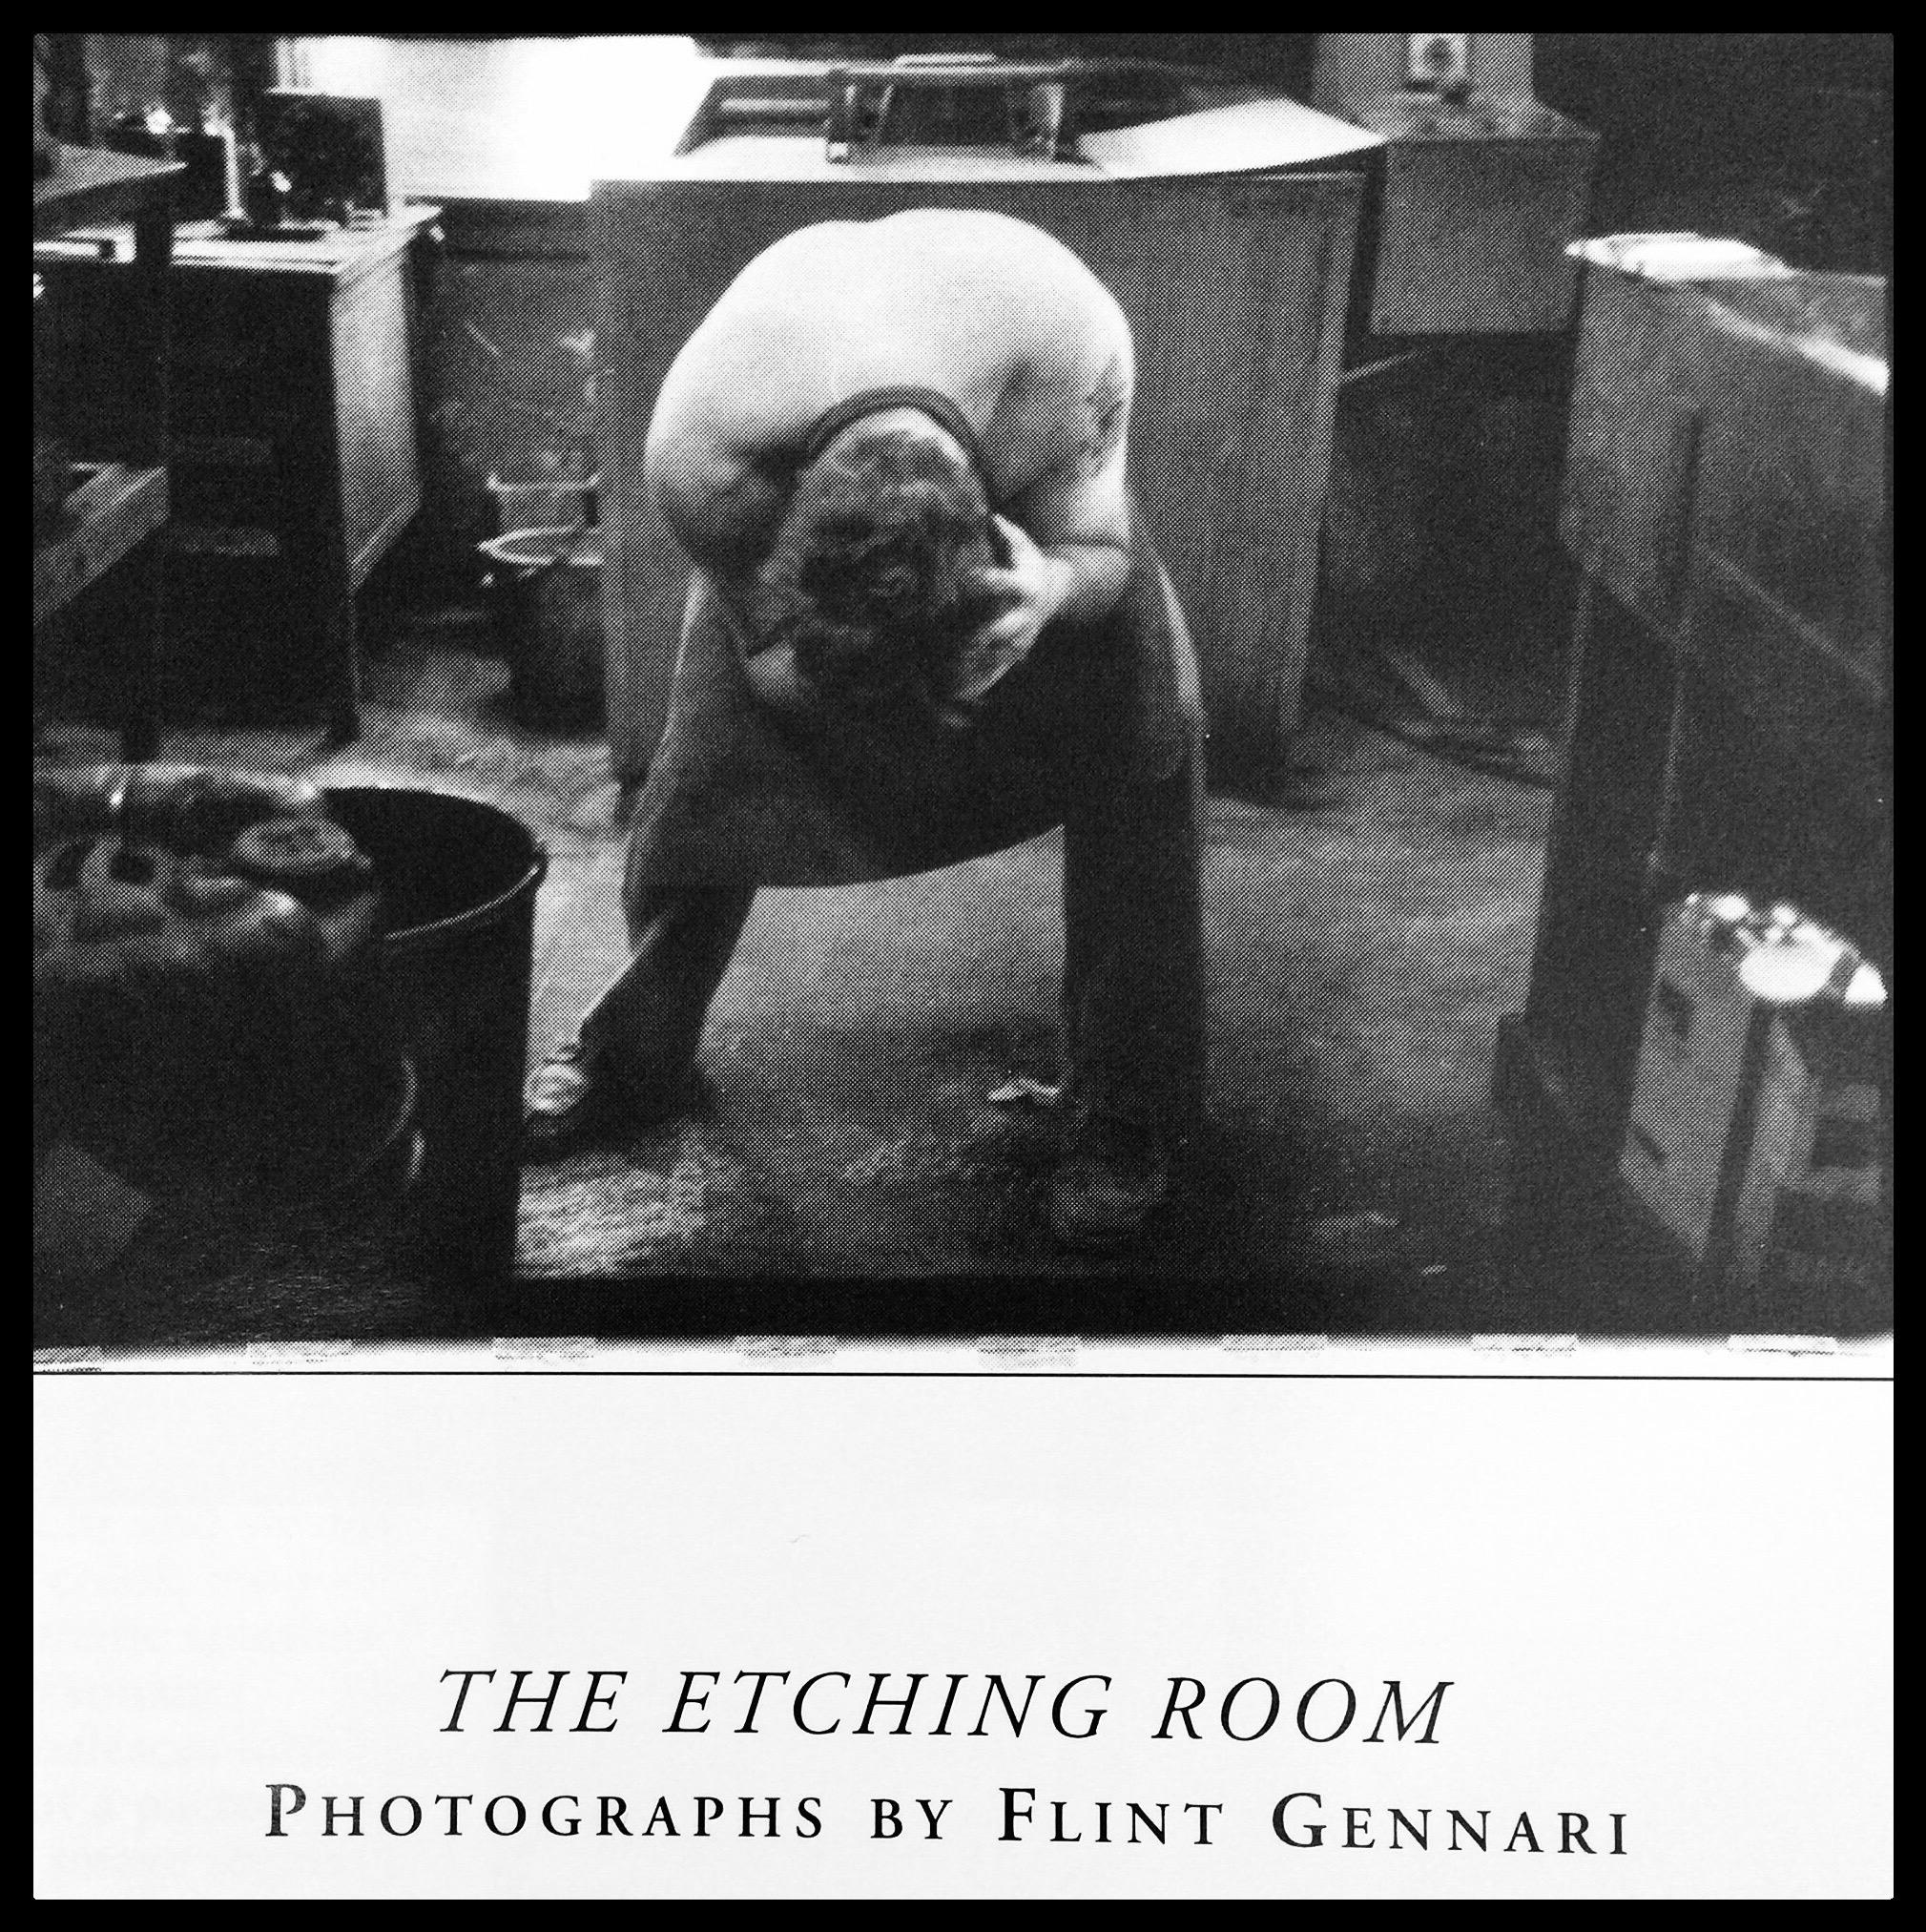 Etching Room